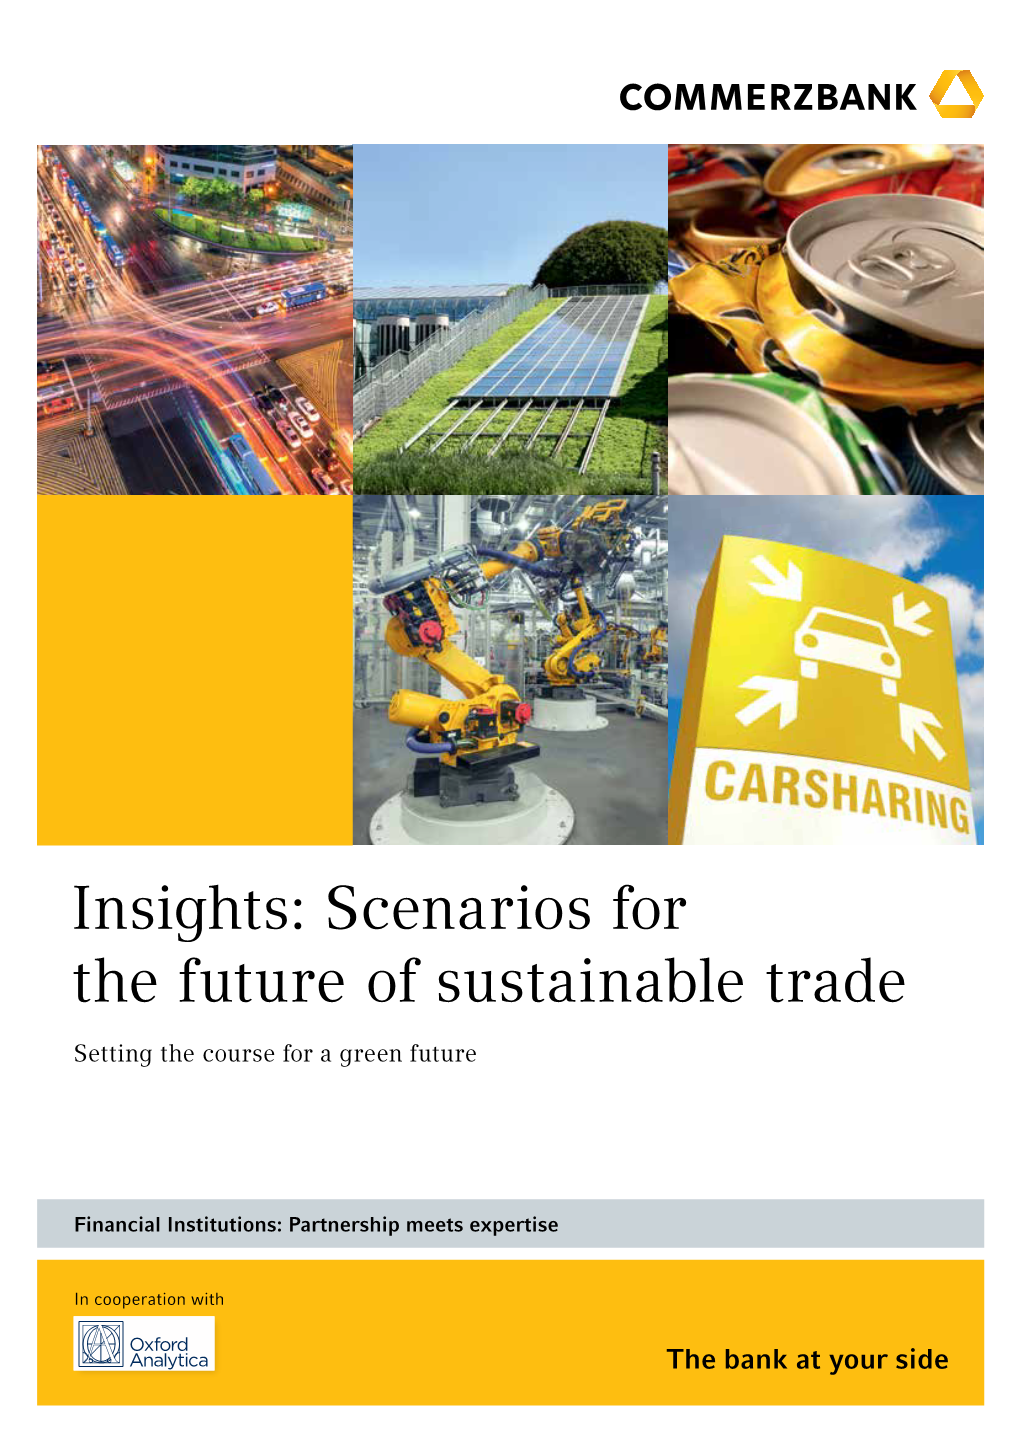 Scenarios for the Future of Sustainable Trade